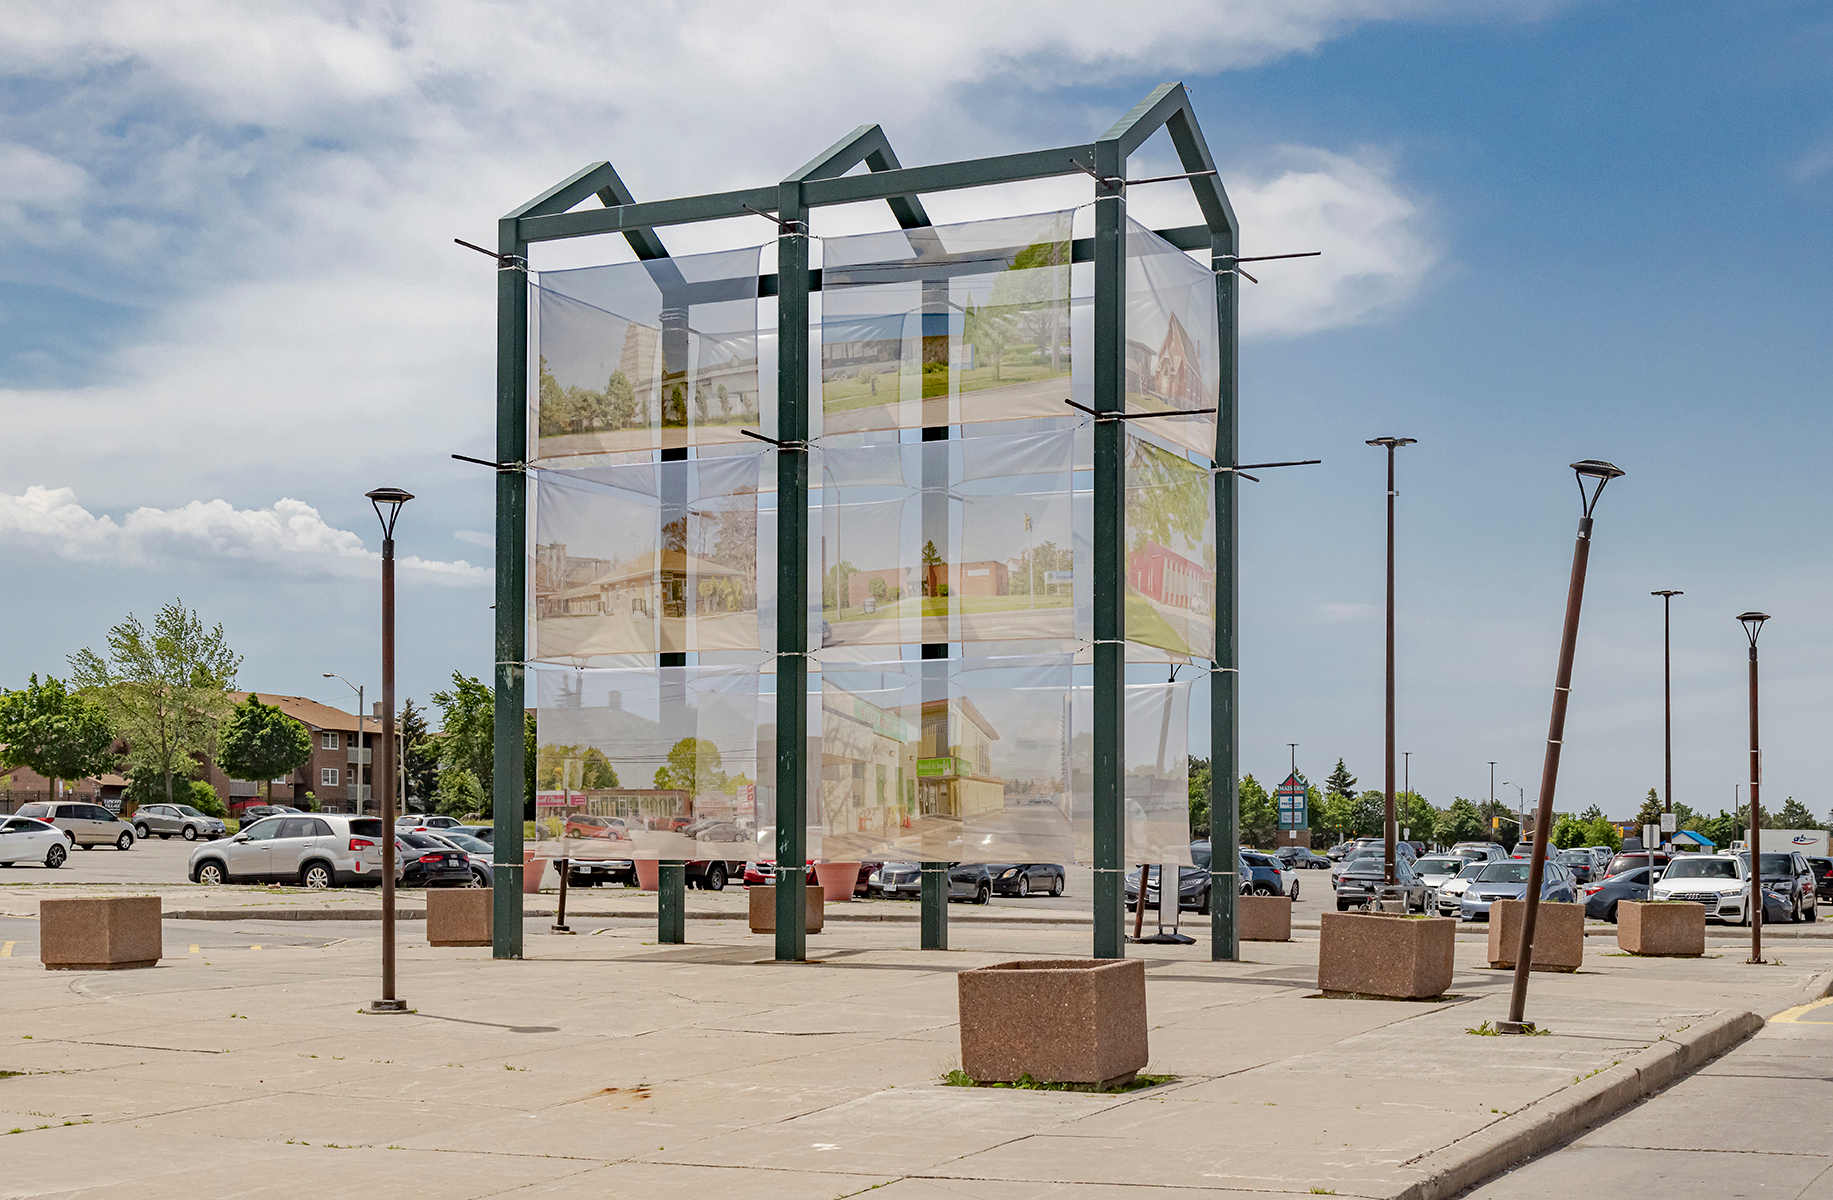     Esmond Lee, Gods Among Us, installation at Malvern Town Centre, Scarborough, 2021. Courtesy of the artist and CONTACT. Photo: Toni
Hafkenscheid

